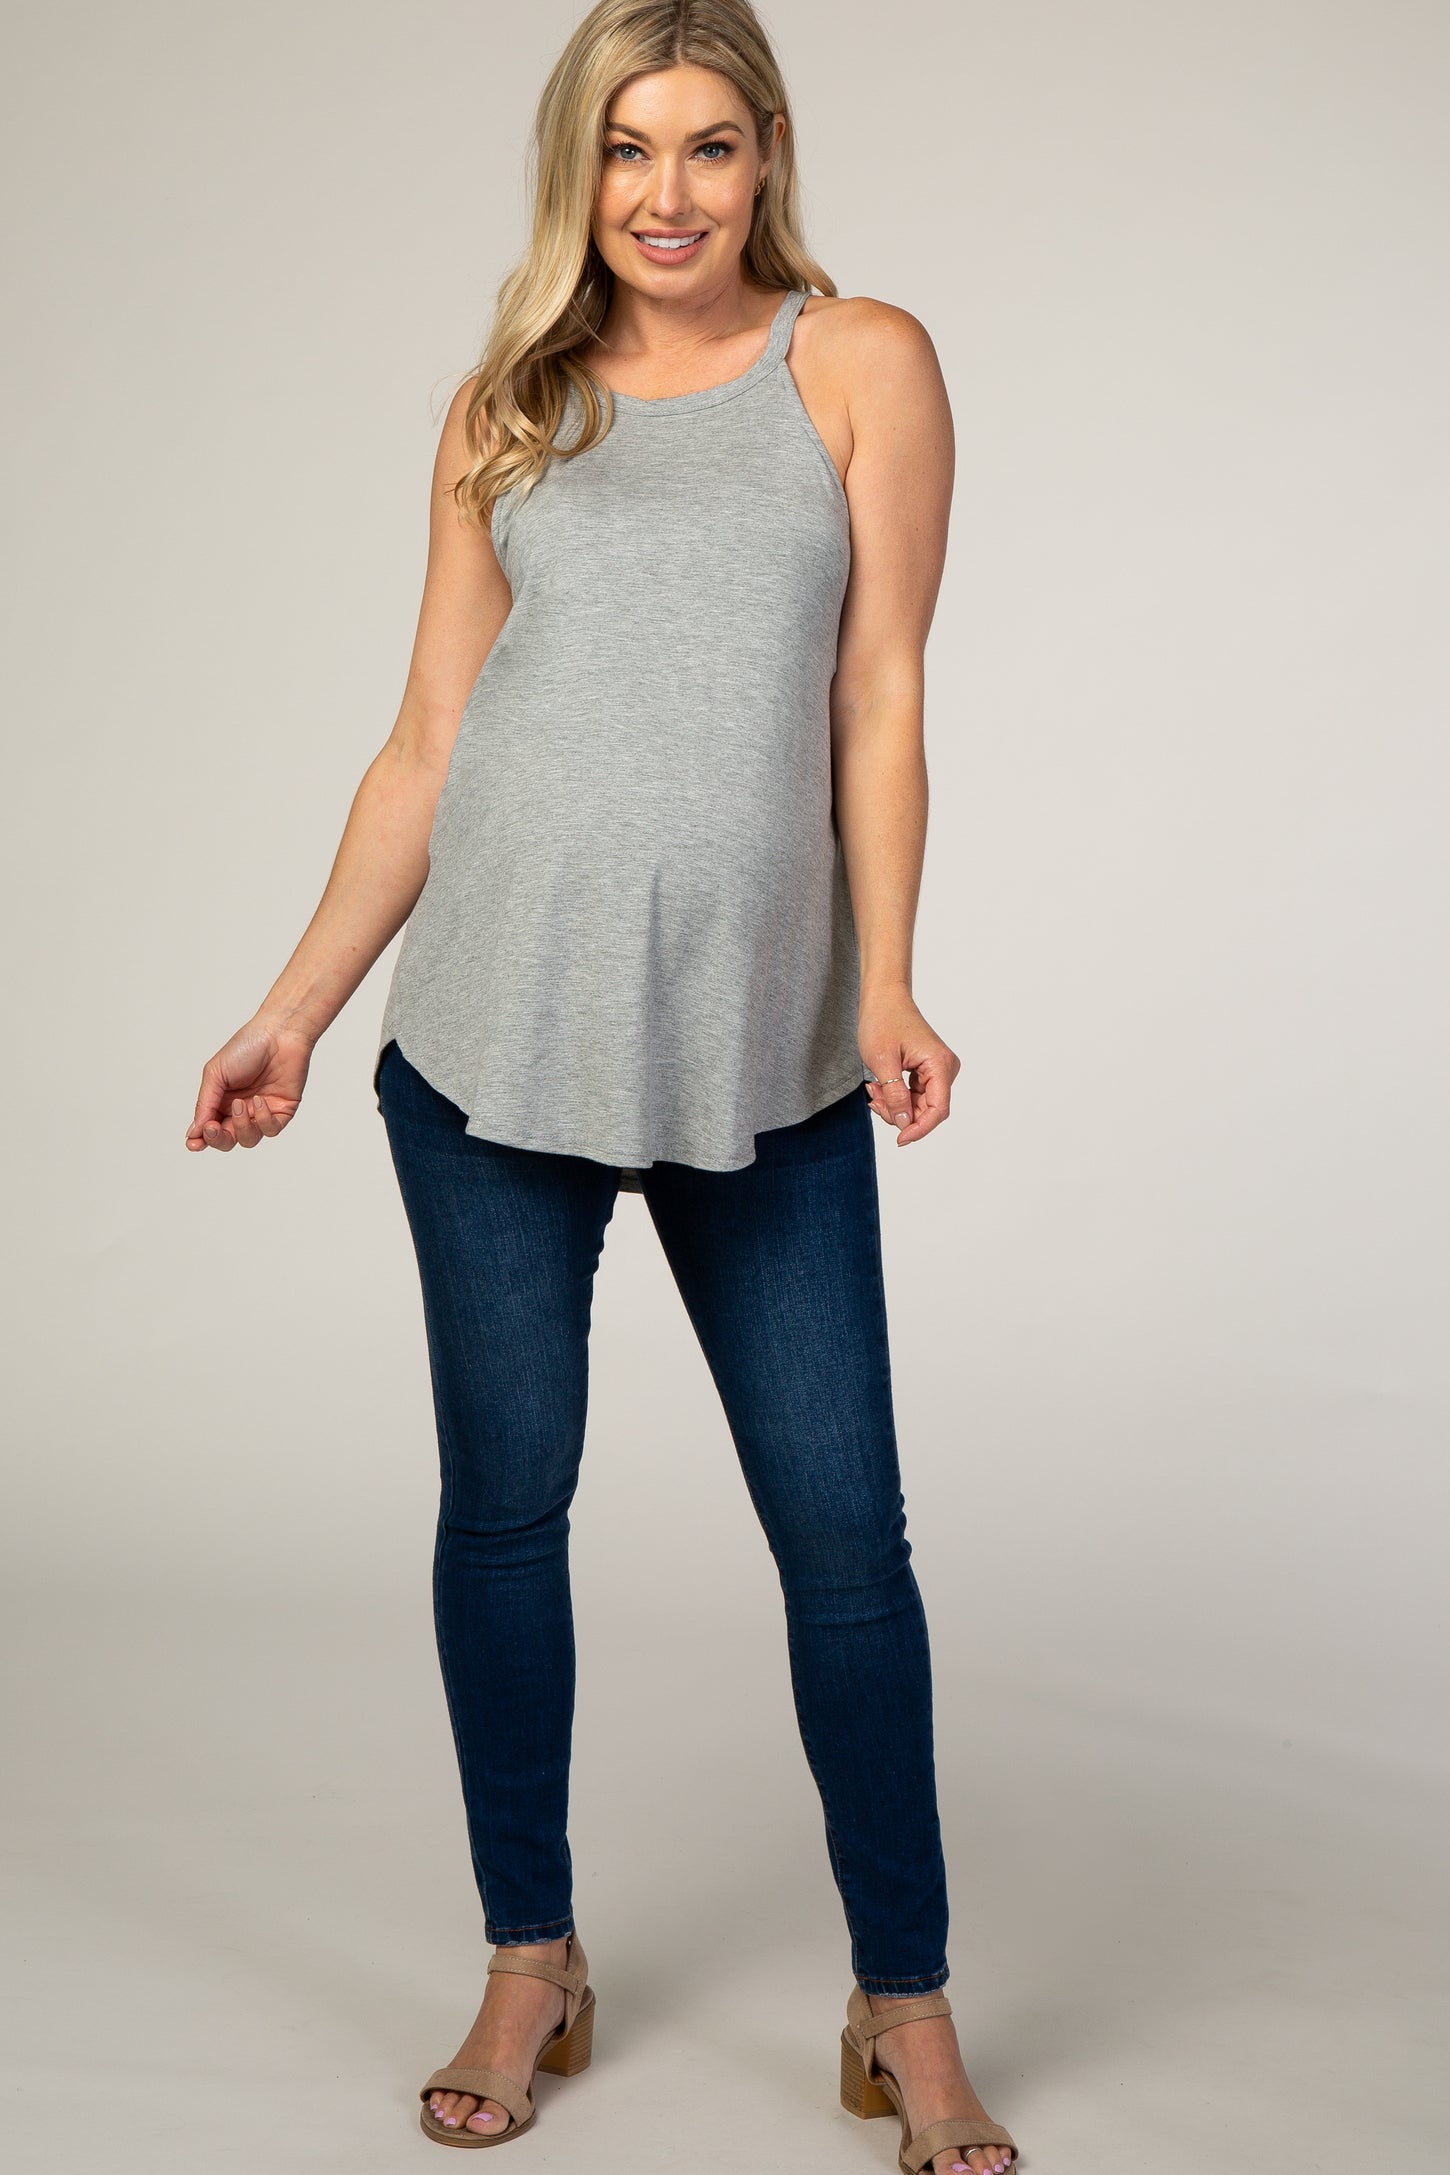 Grey Rounded Halter Neck Maternity Top